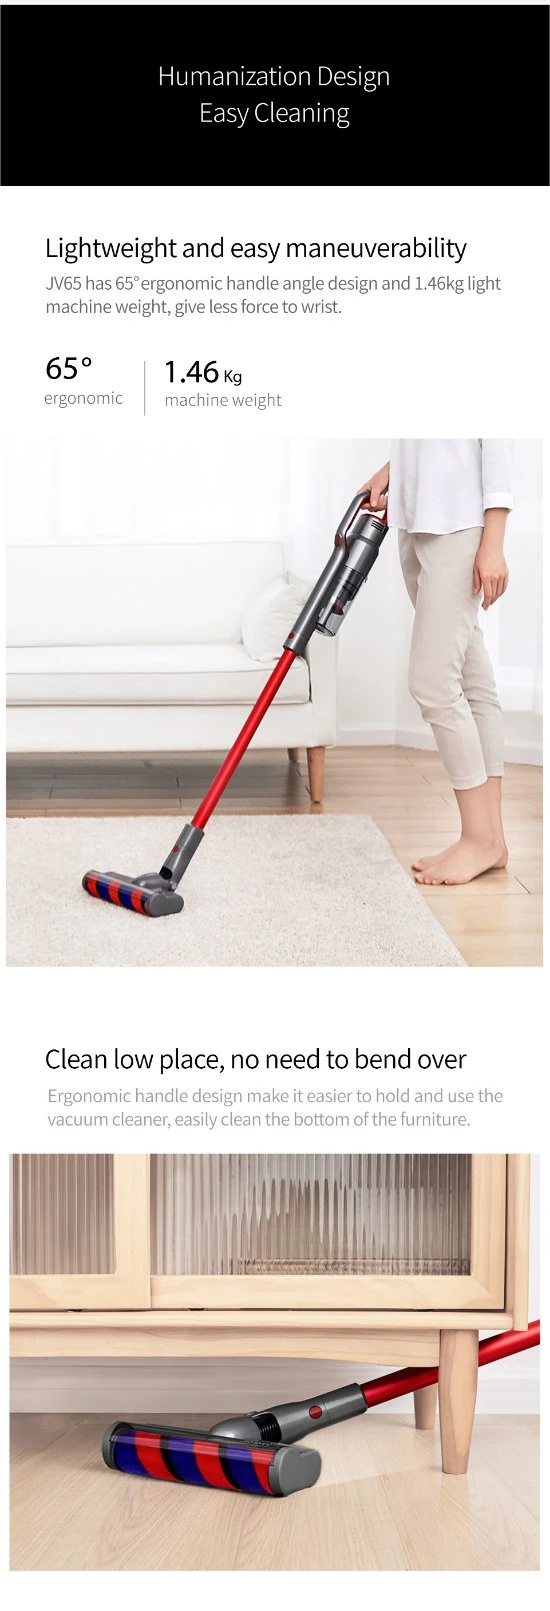 New Upgrade Jimmy Jv65 Wet and Dry Vacuum Cleaner Strong Suction Handheld Cordless Vacuum Cleaner